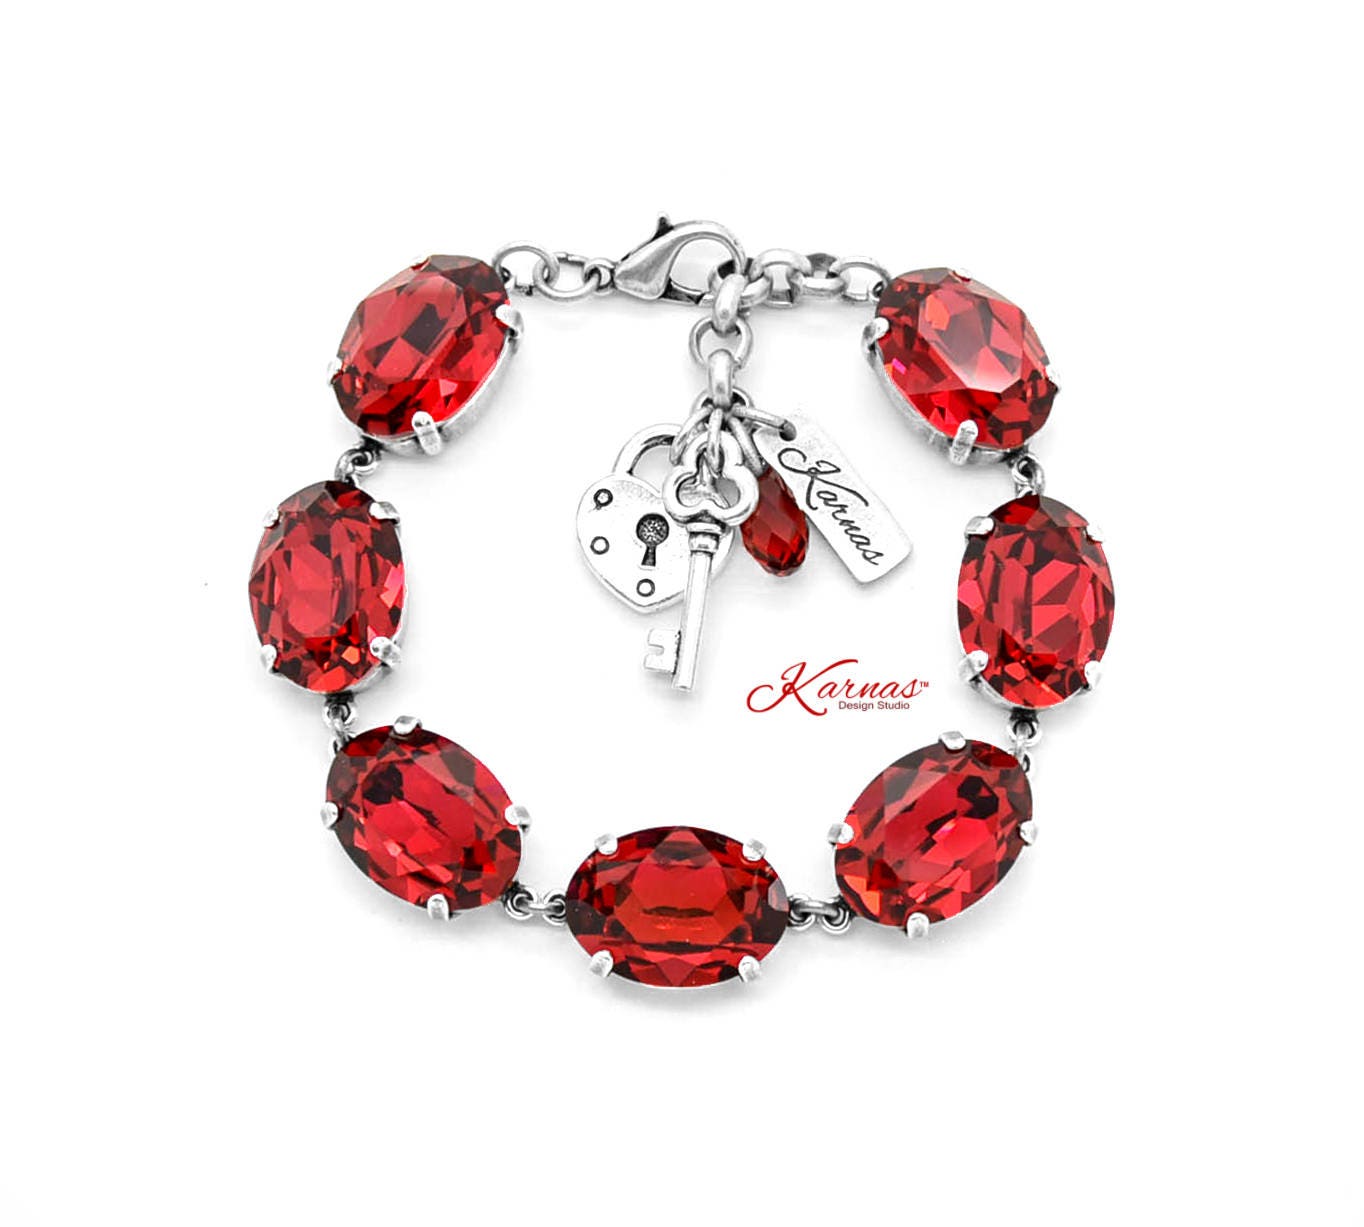 La Belle poque 18x13mm Scarlet Georgian Style Bracelet Made With Crystal Choose Your Finish Karnas Design Studio Free Shipping